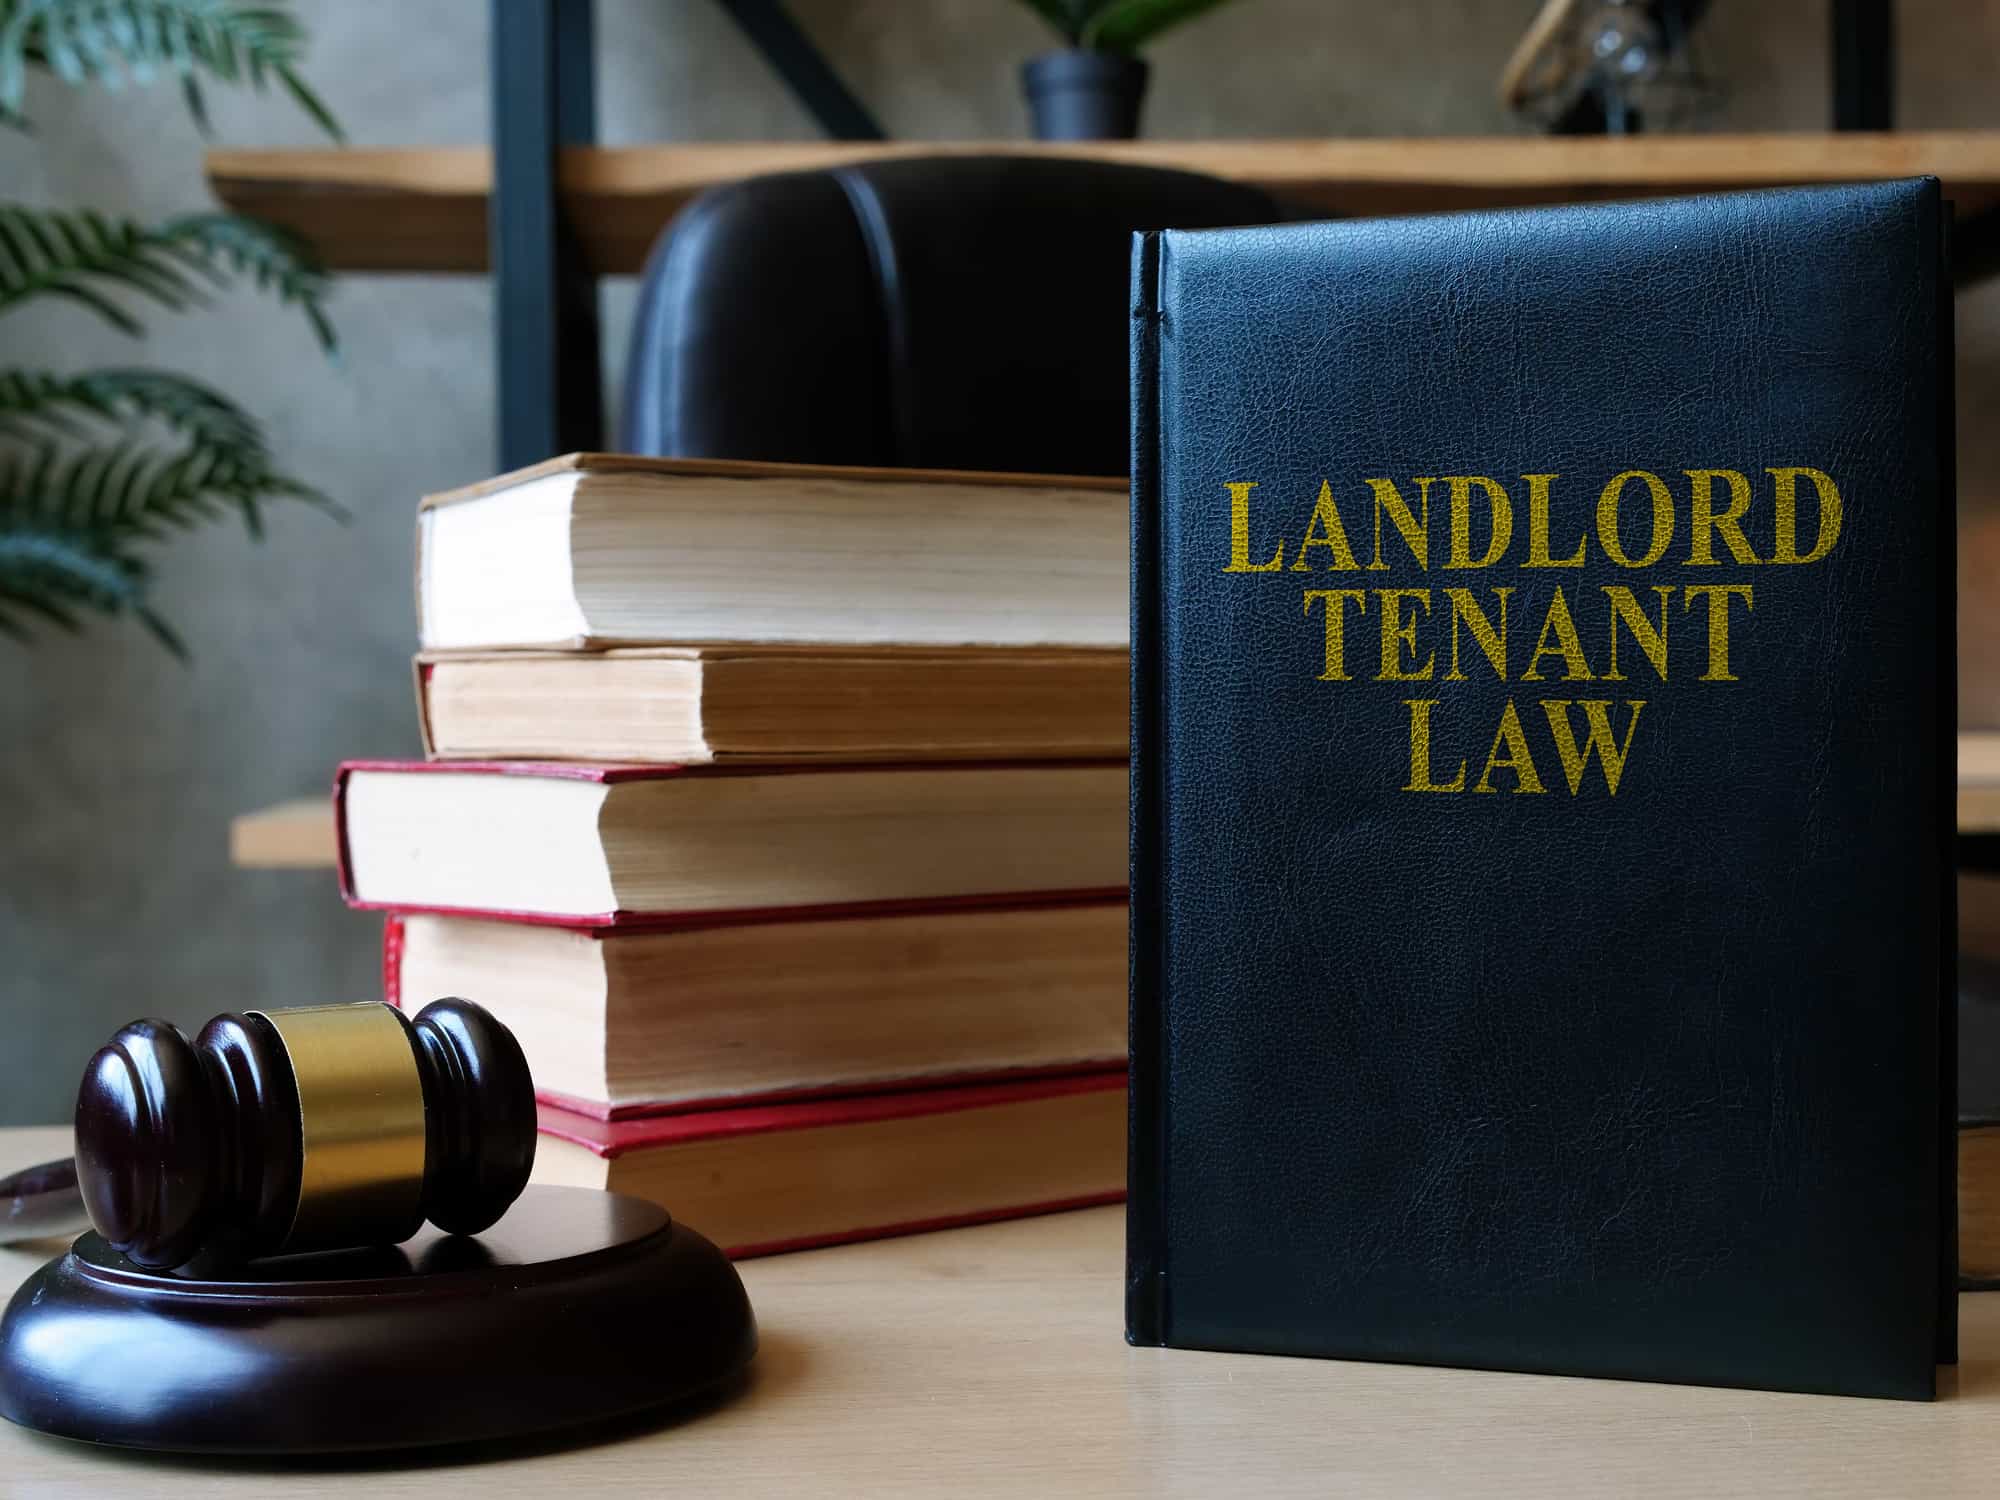 book of landlord and tenant laws on a desk with a gavel